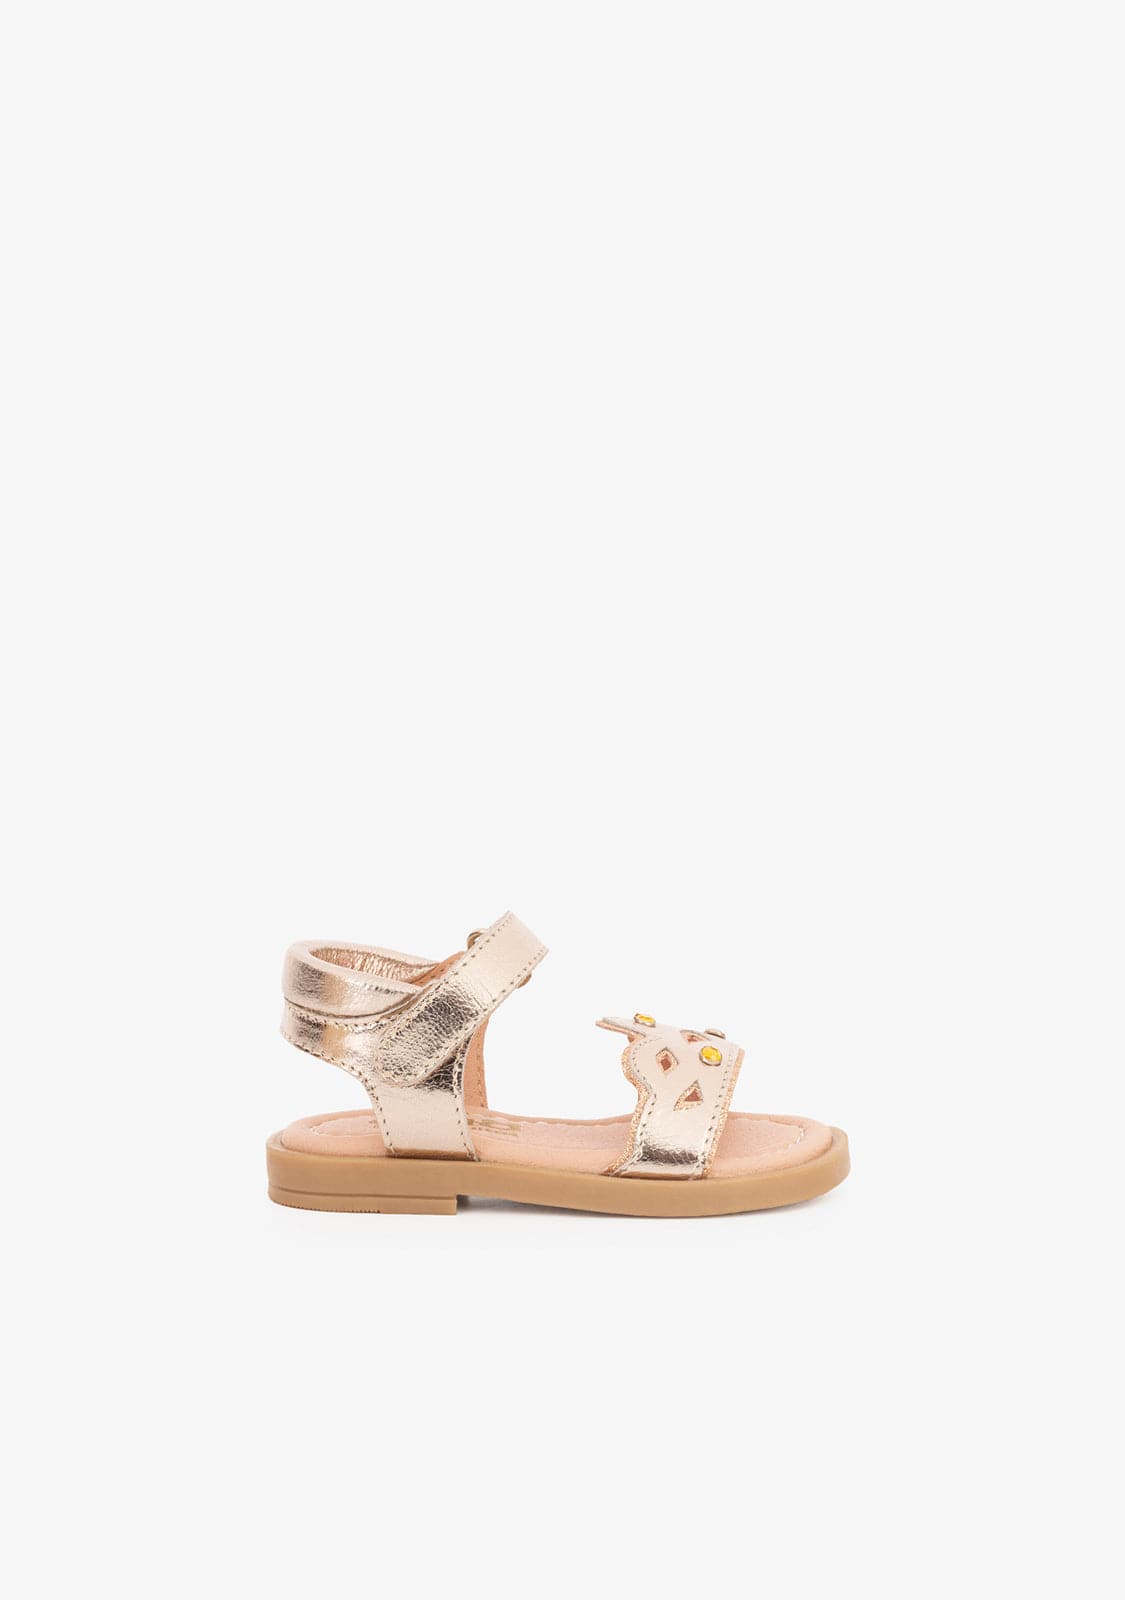 OSITO Shoes Baby's Crown Platinum Leather Sandals